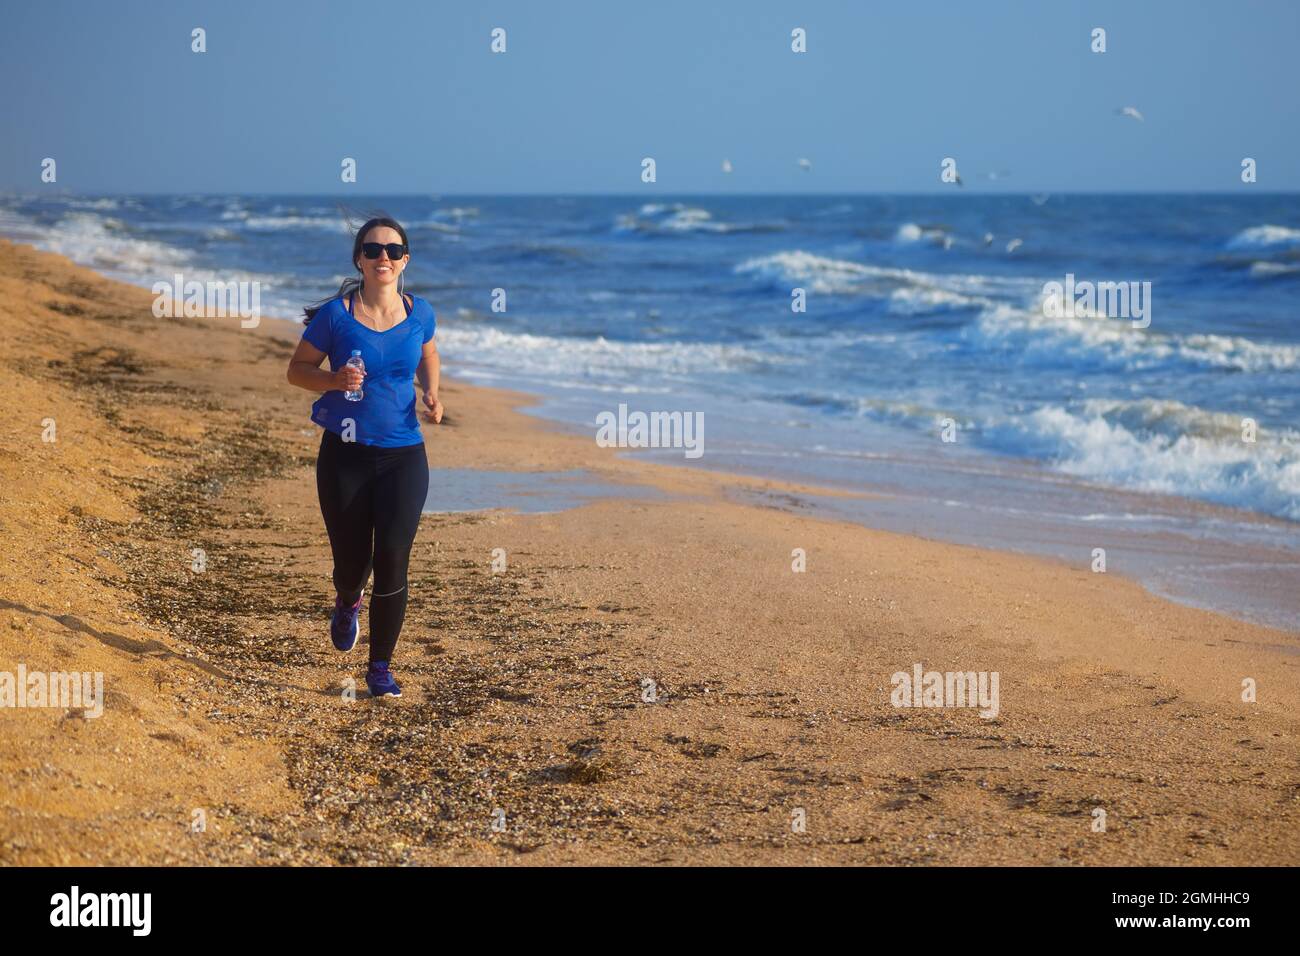 woman running by the sea beach and listening music Stock Photo